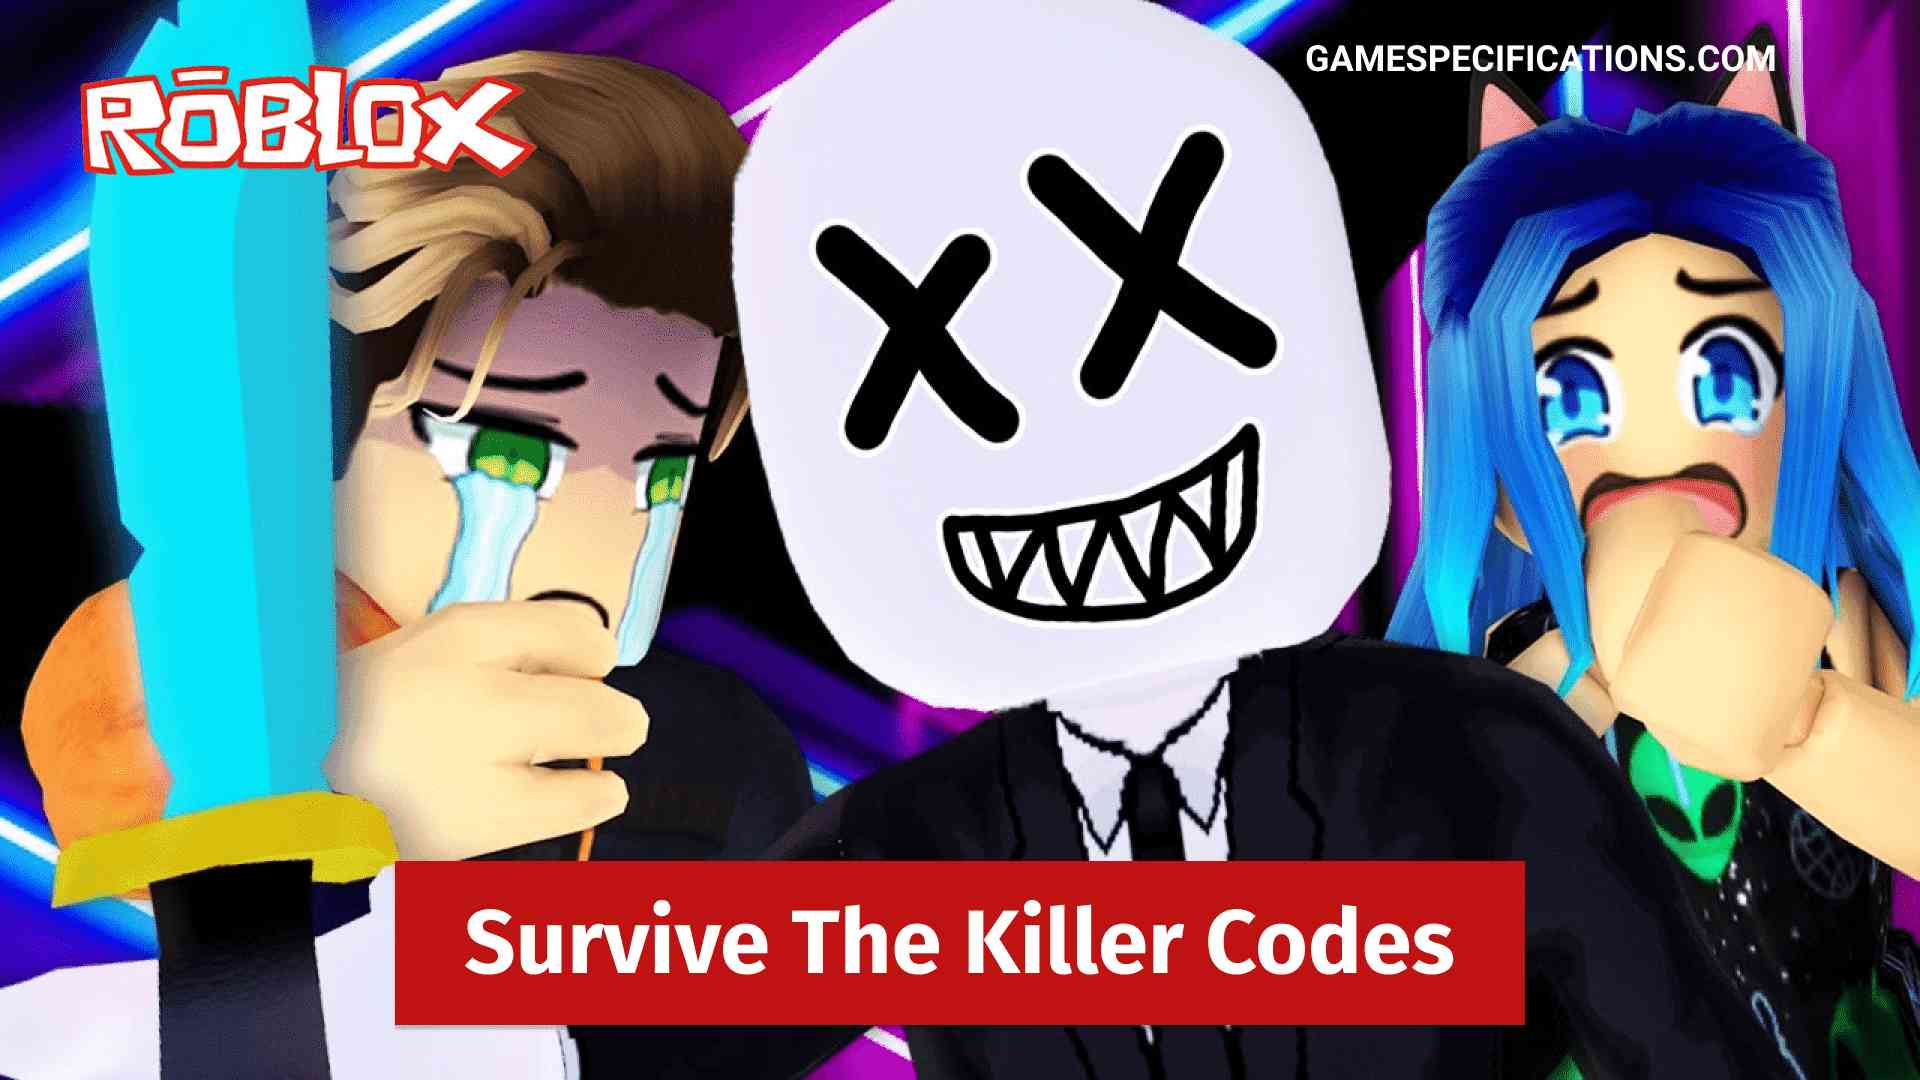 Roblox Survive The Killer Codes July 2021 Game Specifications - code redeem roblox survive the killer